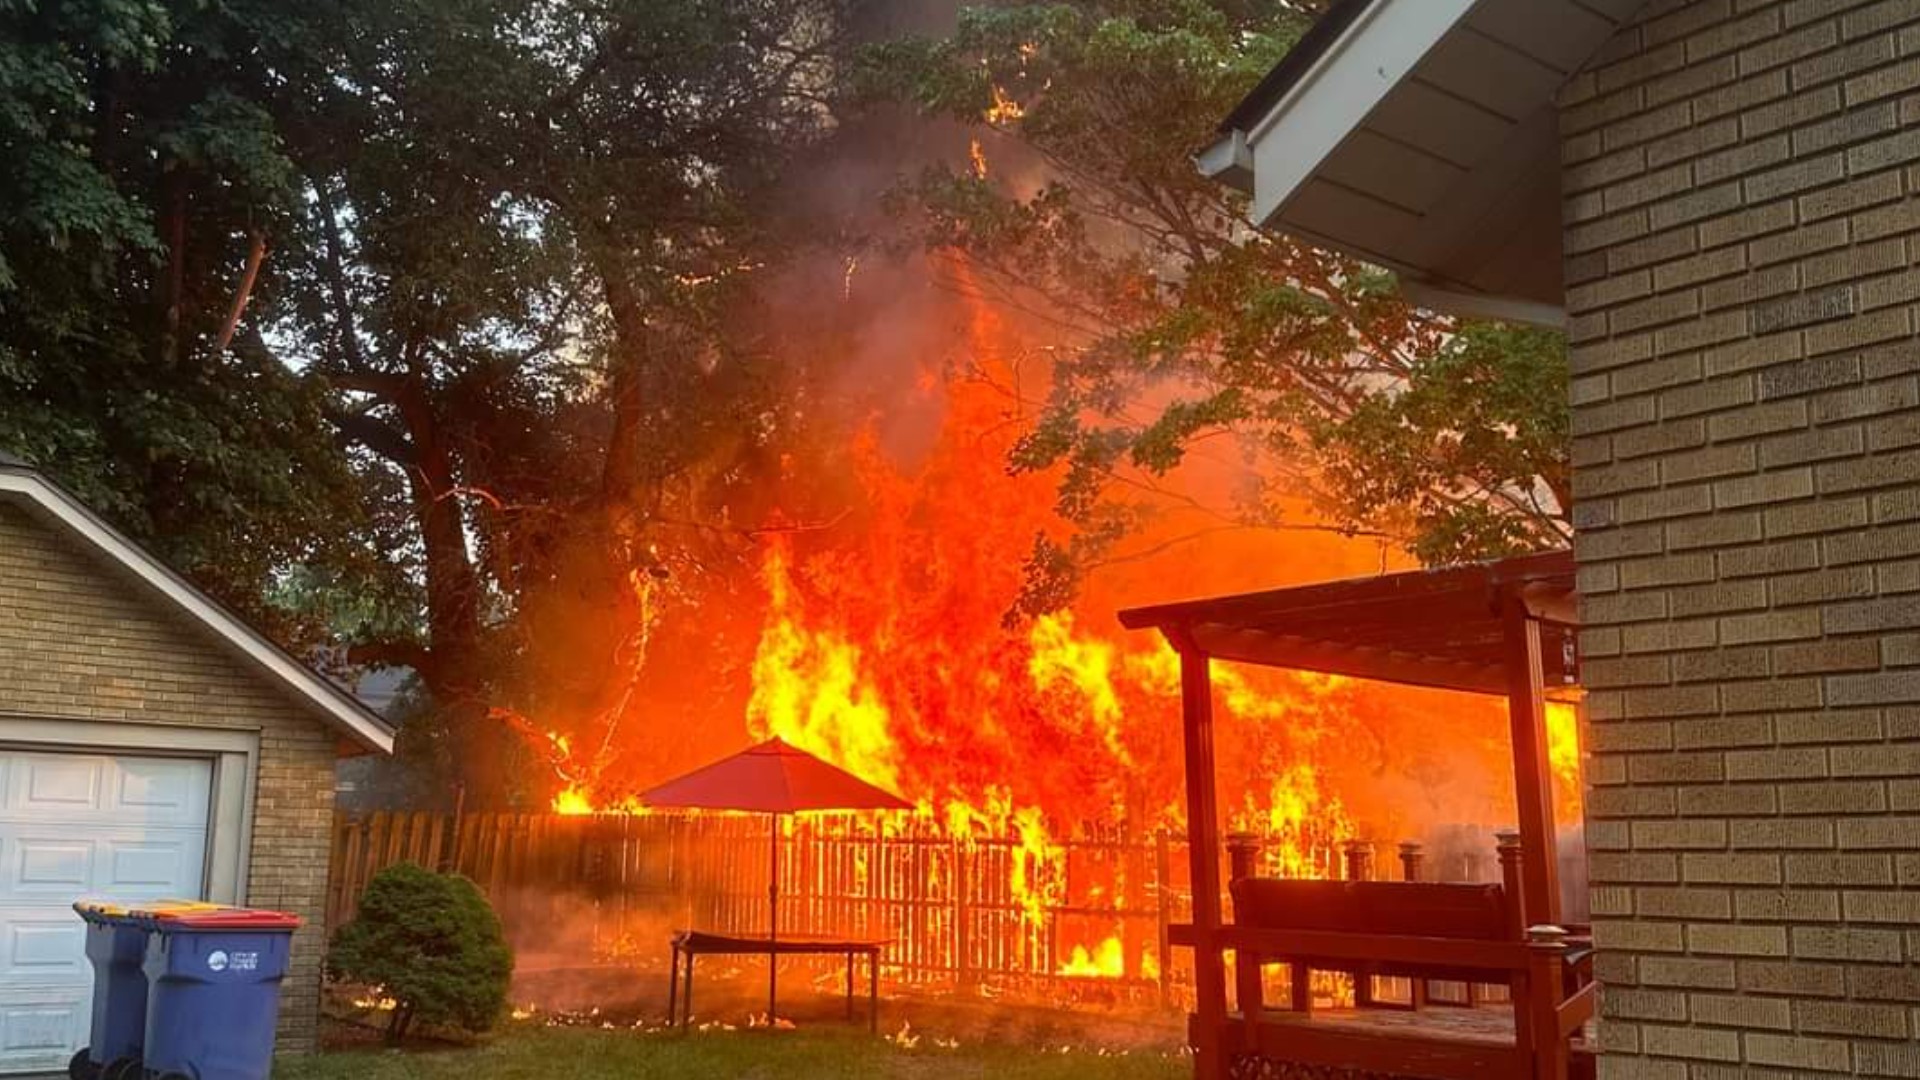 Within three days, firefighters have been called to three separate fires in Grand Rapids that have all been caused by outdoor grilling.